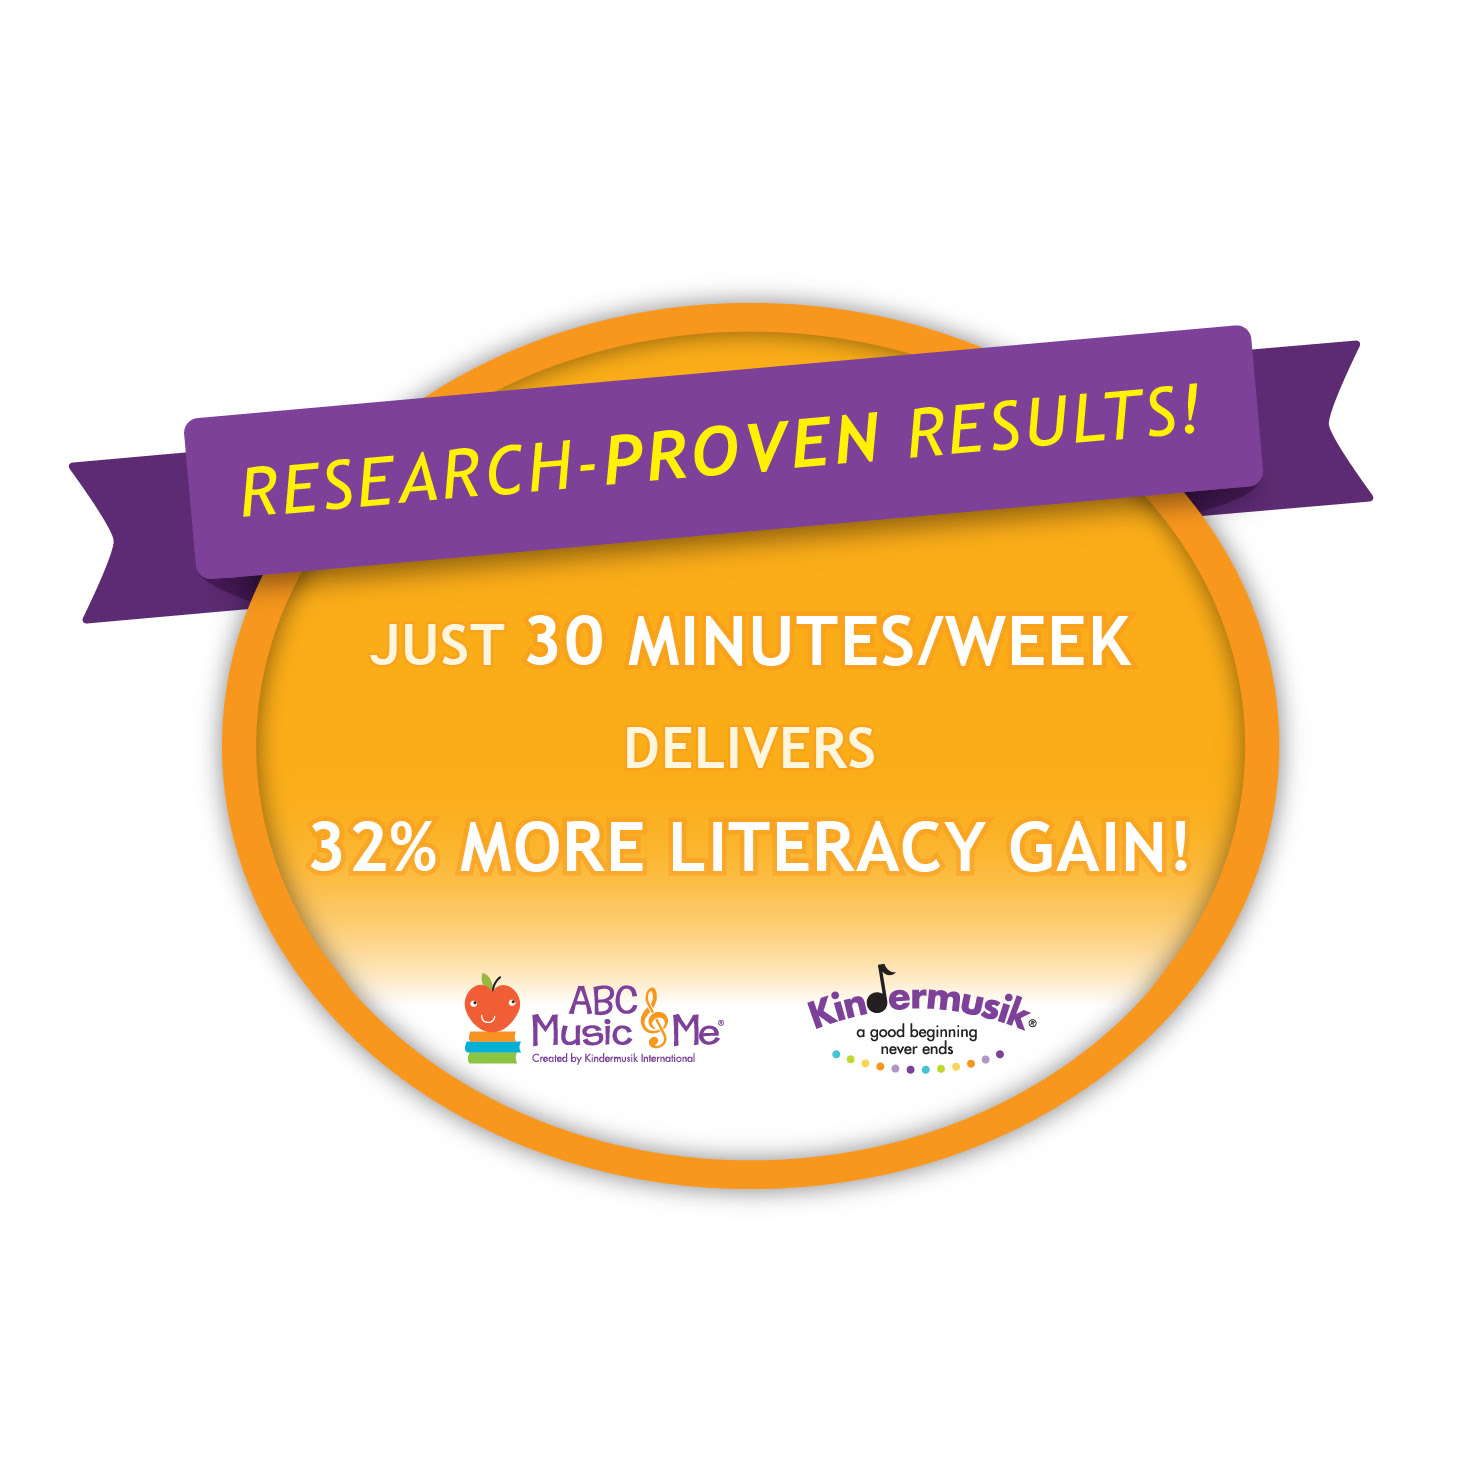 30 min./ wk delivers 32% more literacy gain!